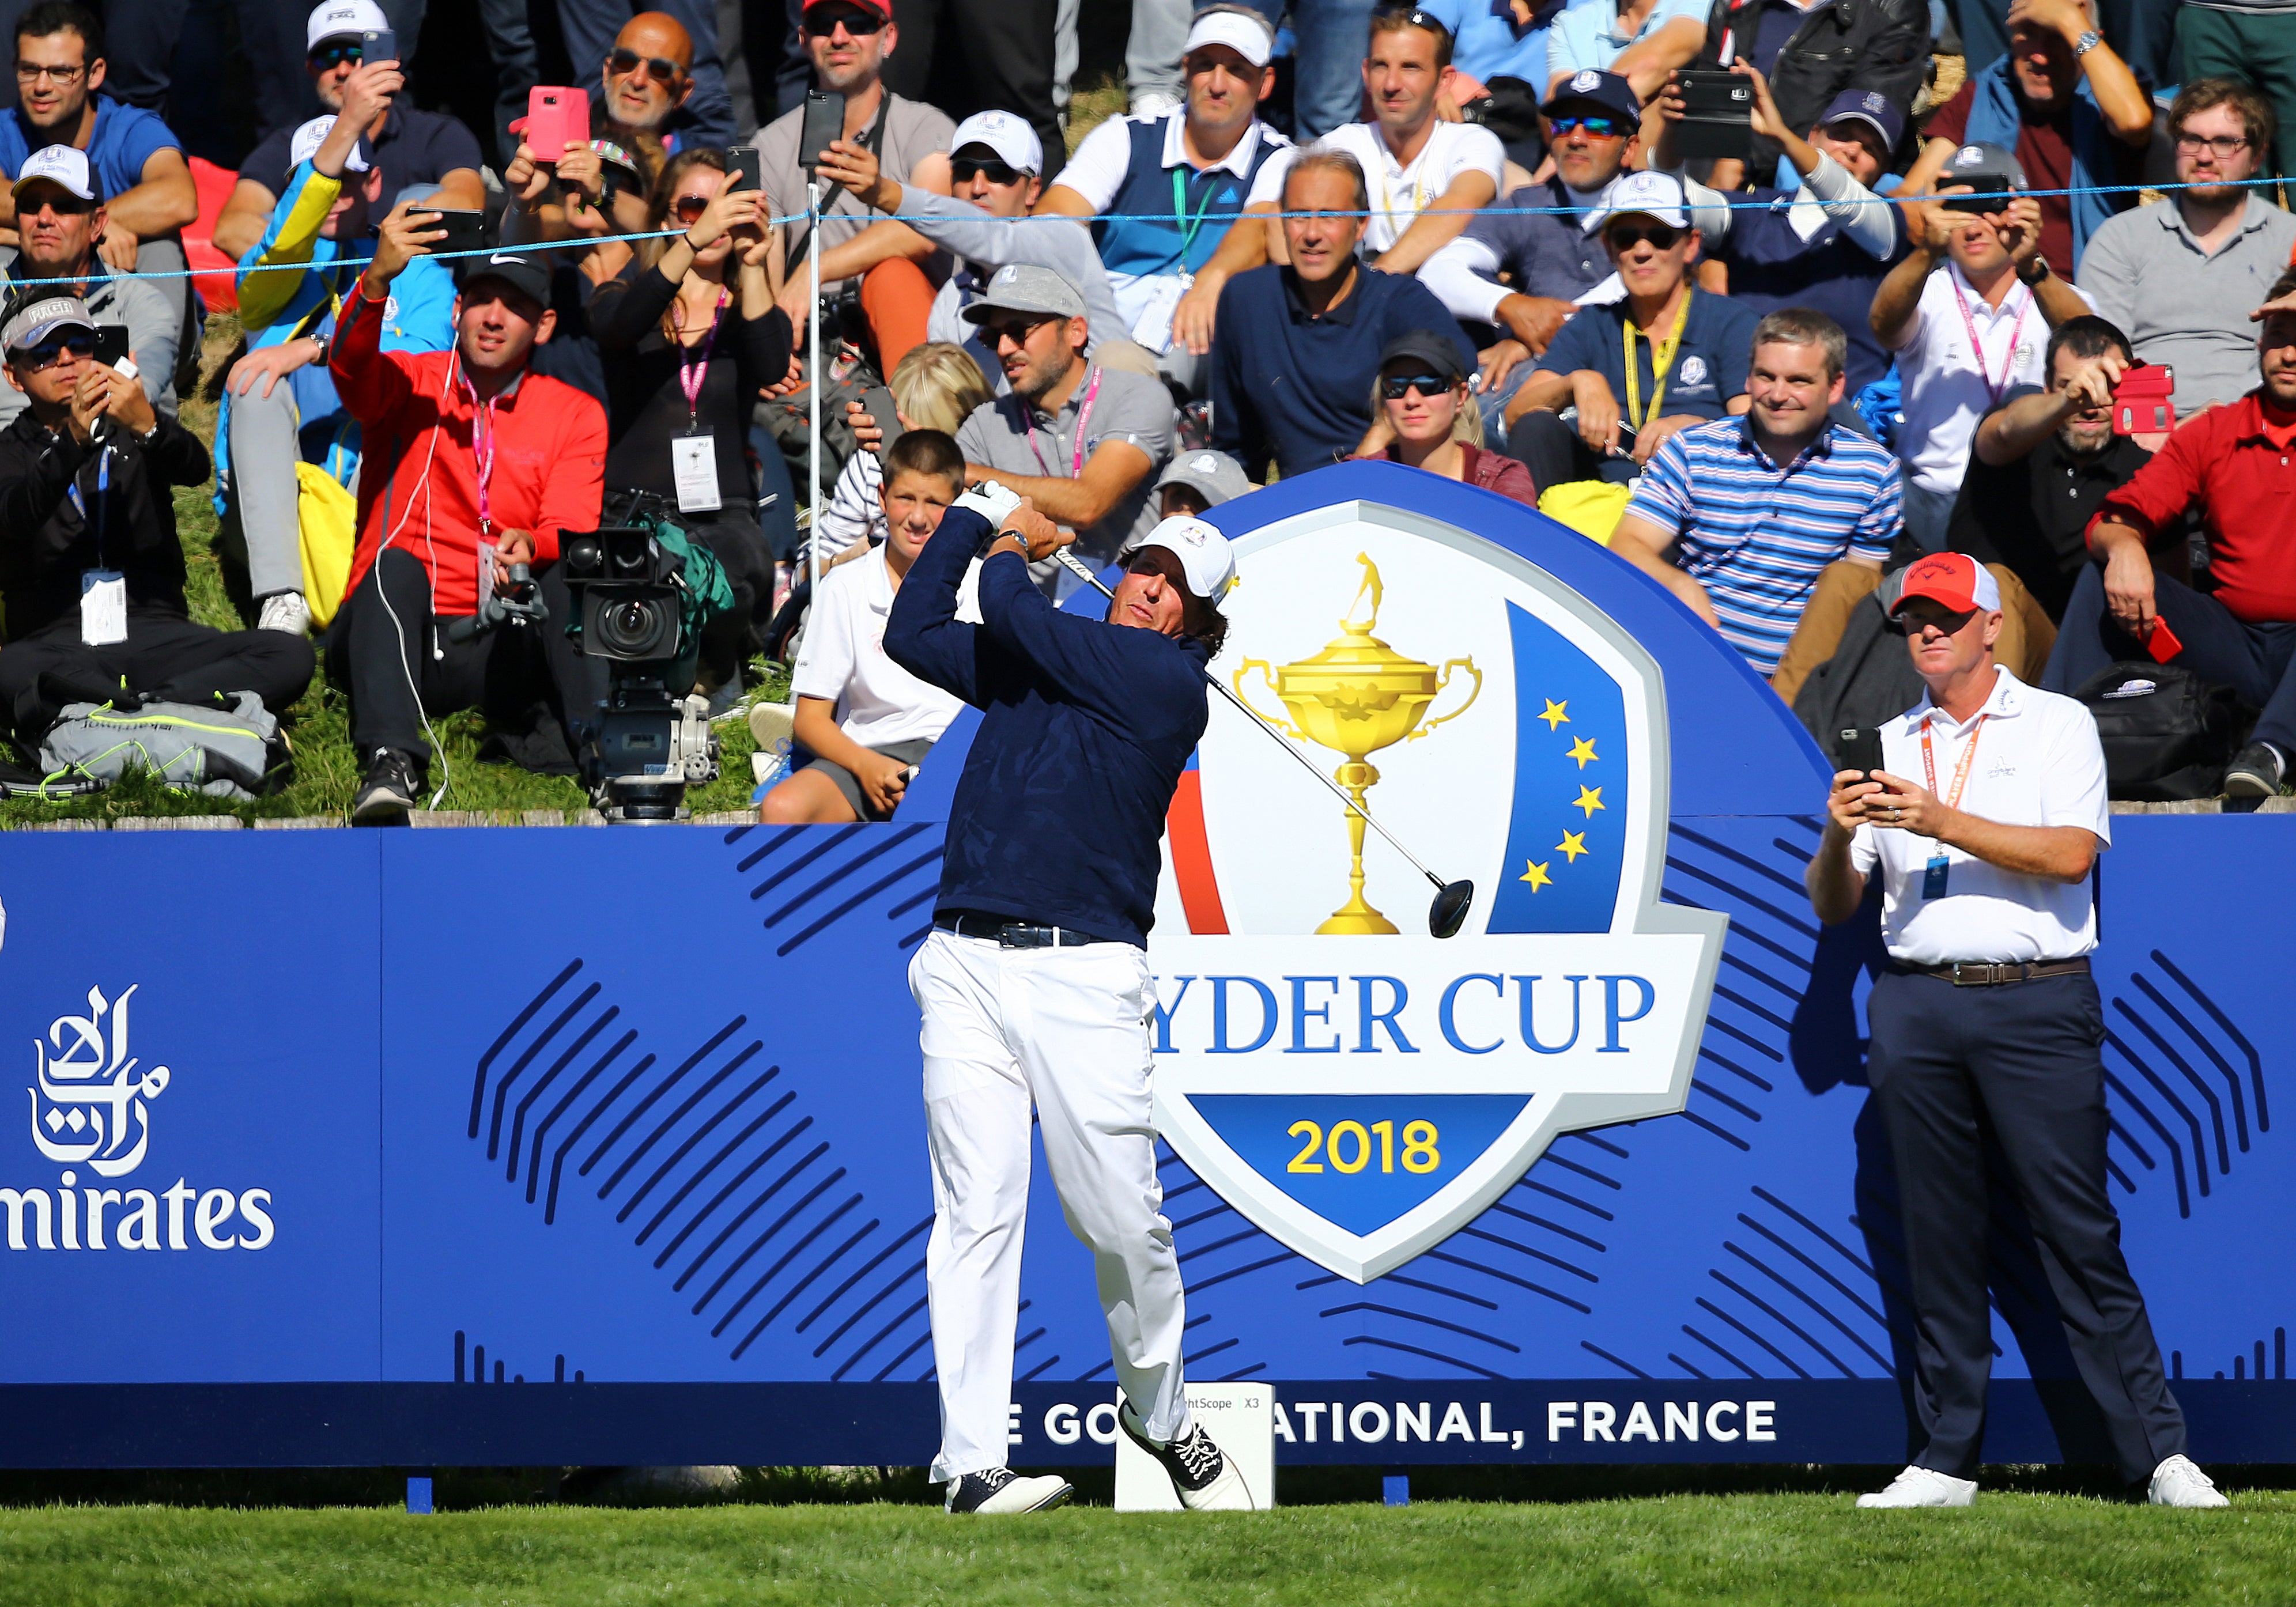 Phil Mickelson tees off in the Ryder Cup